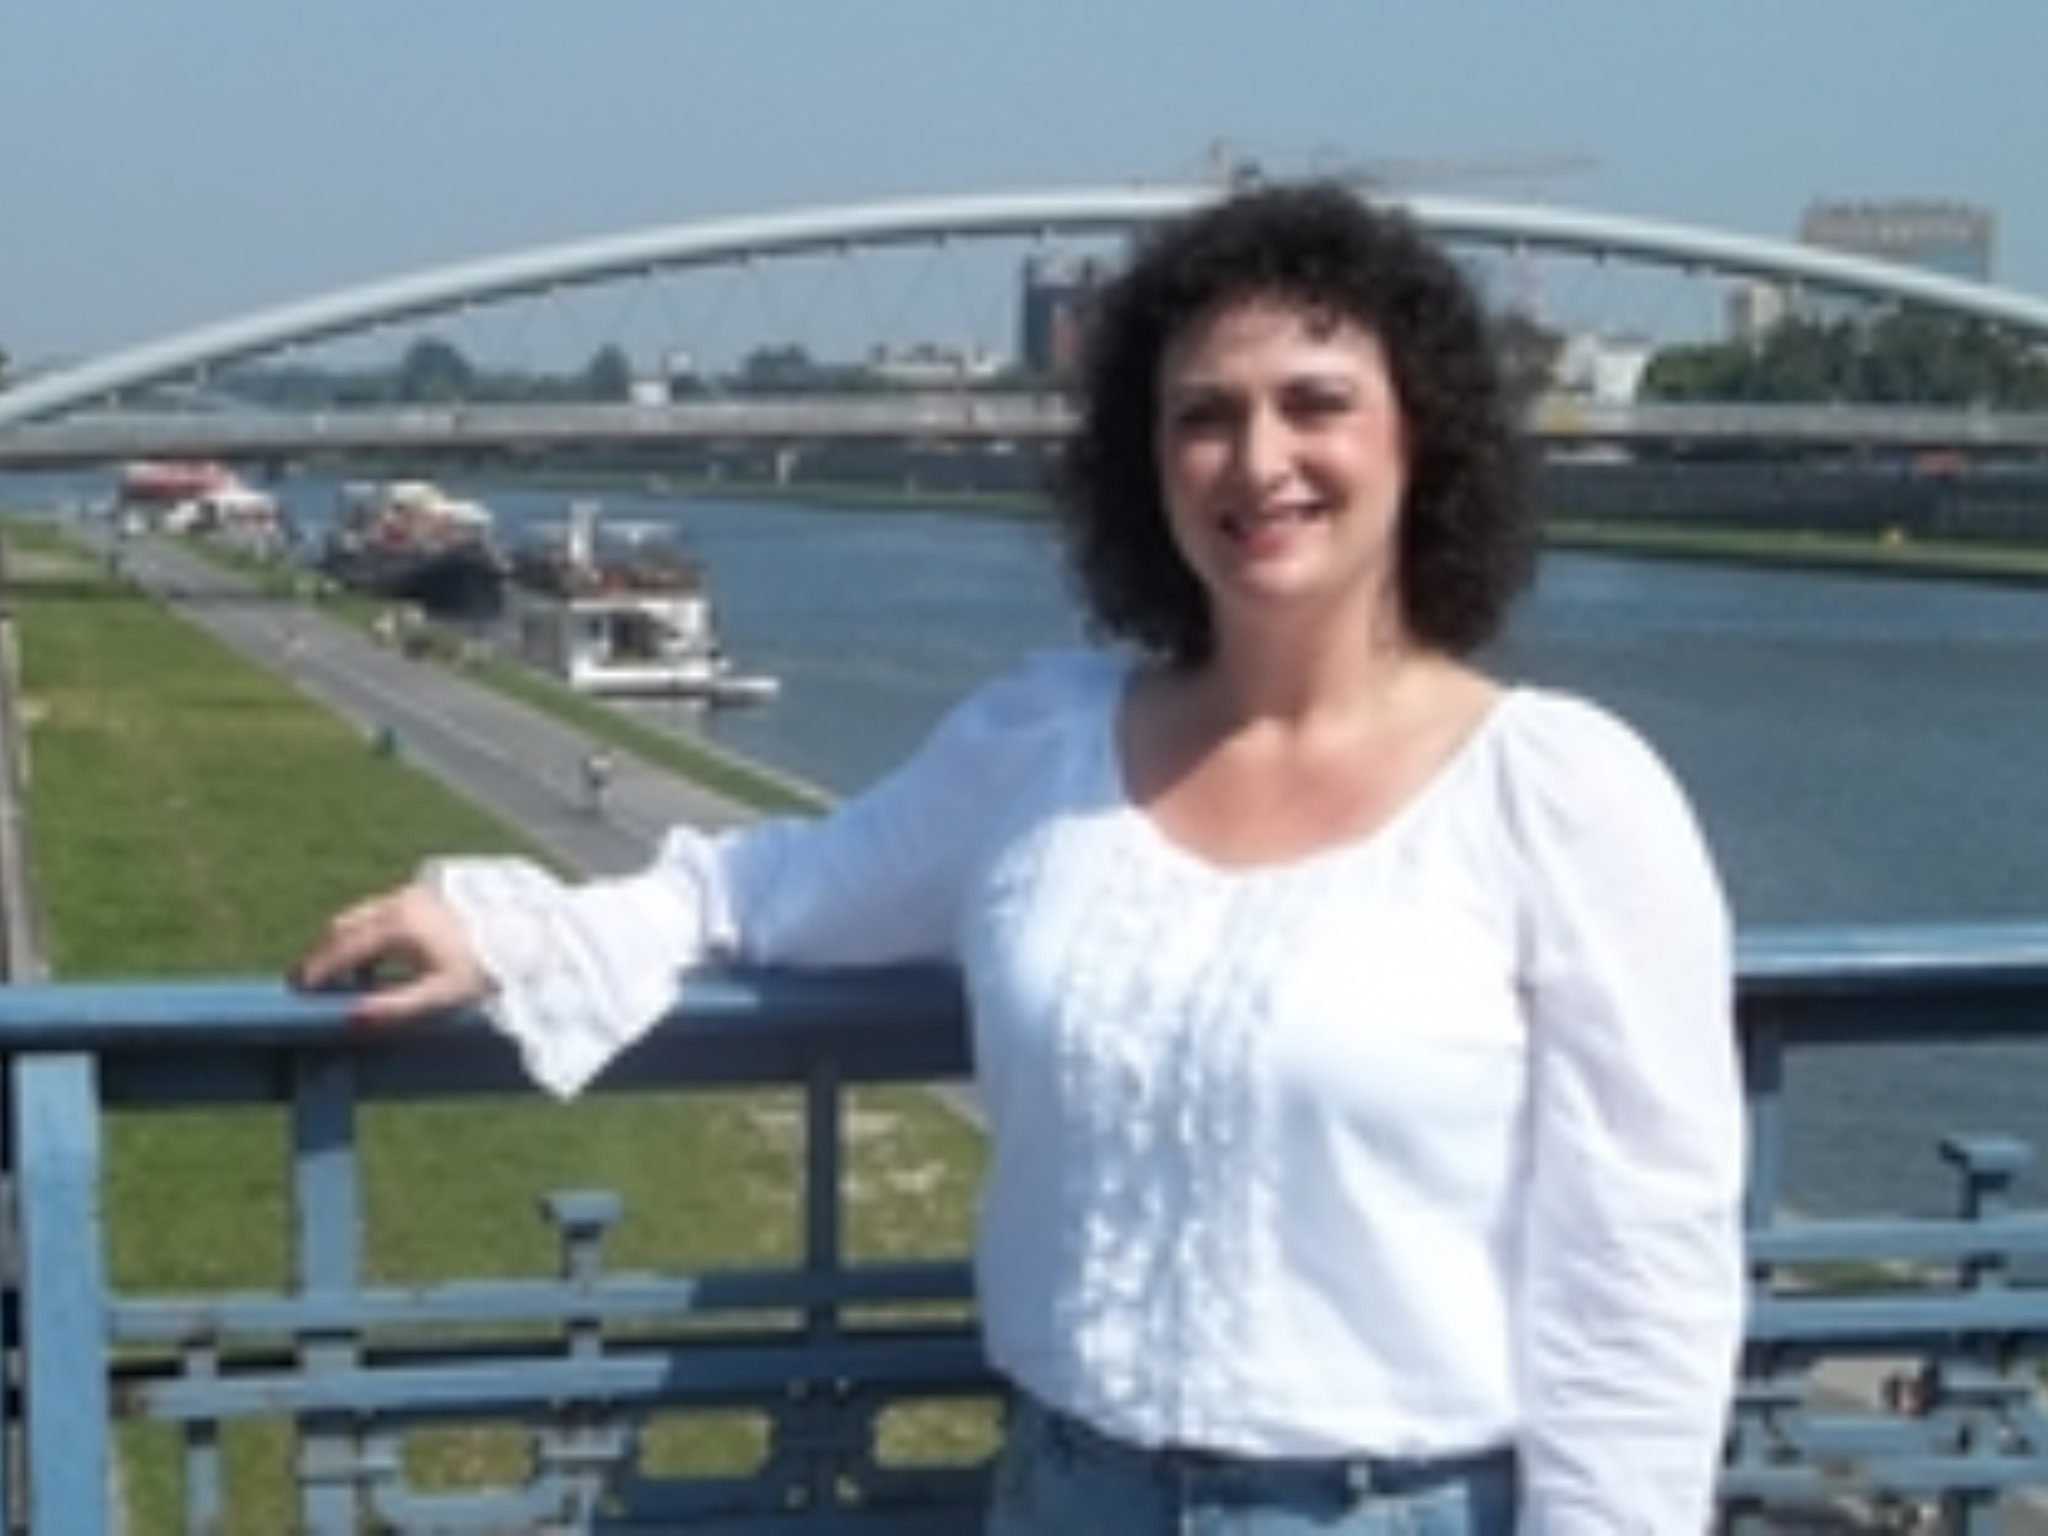 I am standing on a bridge which is in front of the newly constructed Slashi bridge, for walking civilians only. It was on this bridge that my father watched as the Nazis marched across it to meet with the then Krakow Mayor, who welcomed them. The bridge is named Slashi, pronounced "Shaloshki".